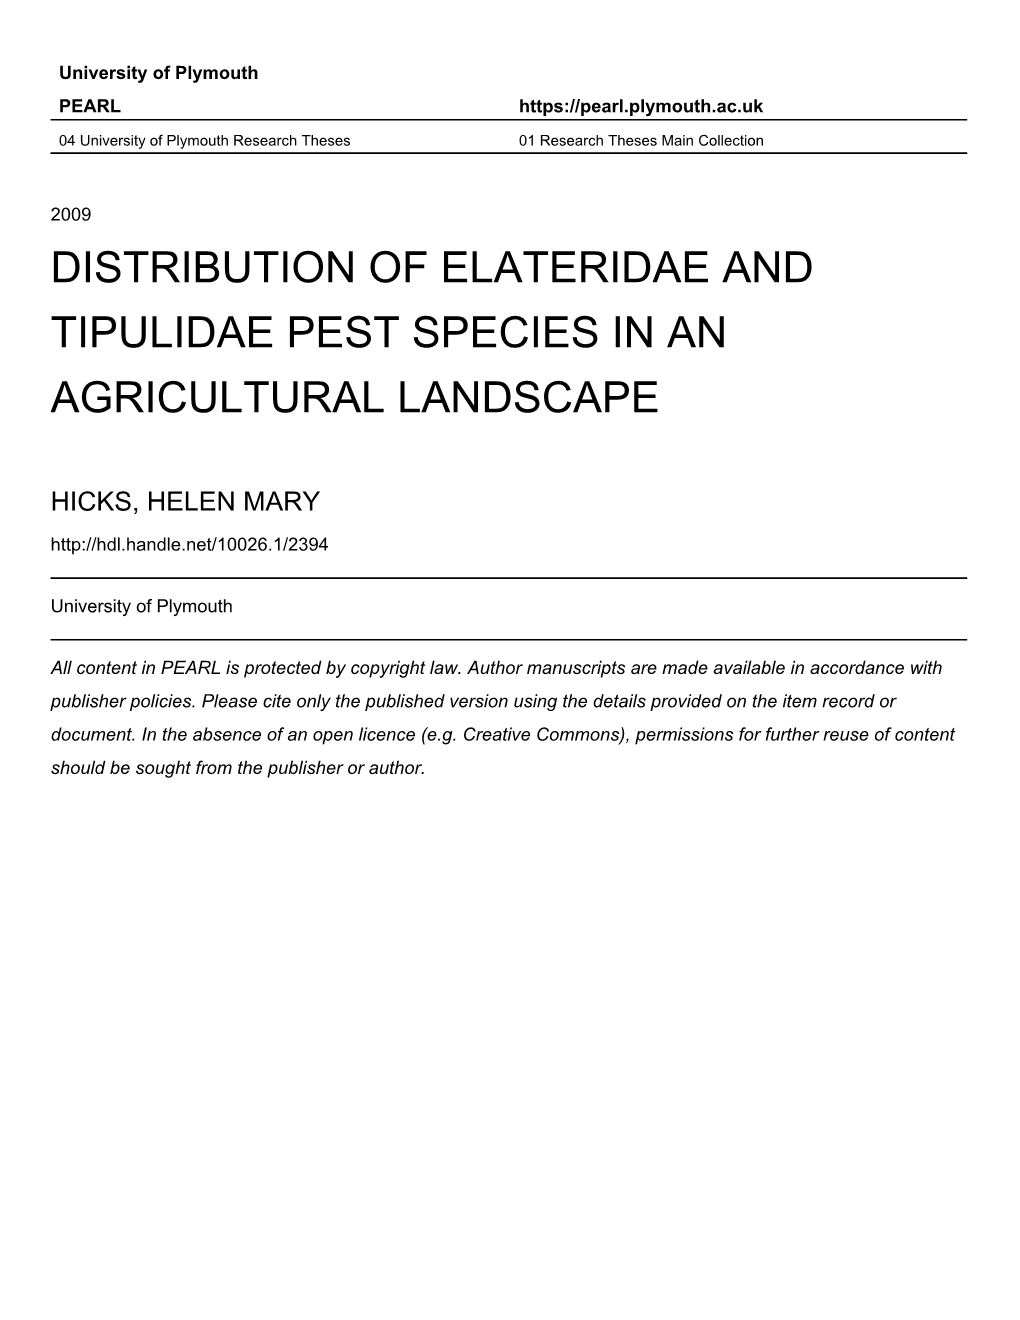 Distribution of Elateridae and Tipulidae Pest Species in an Agricultural Landscape